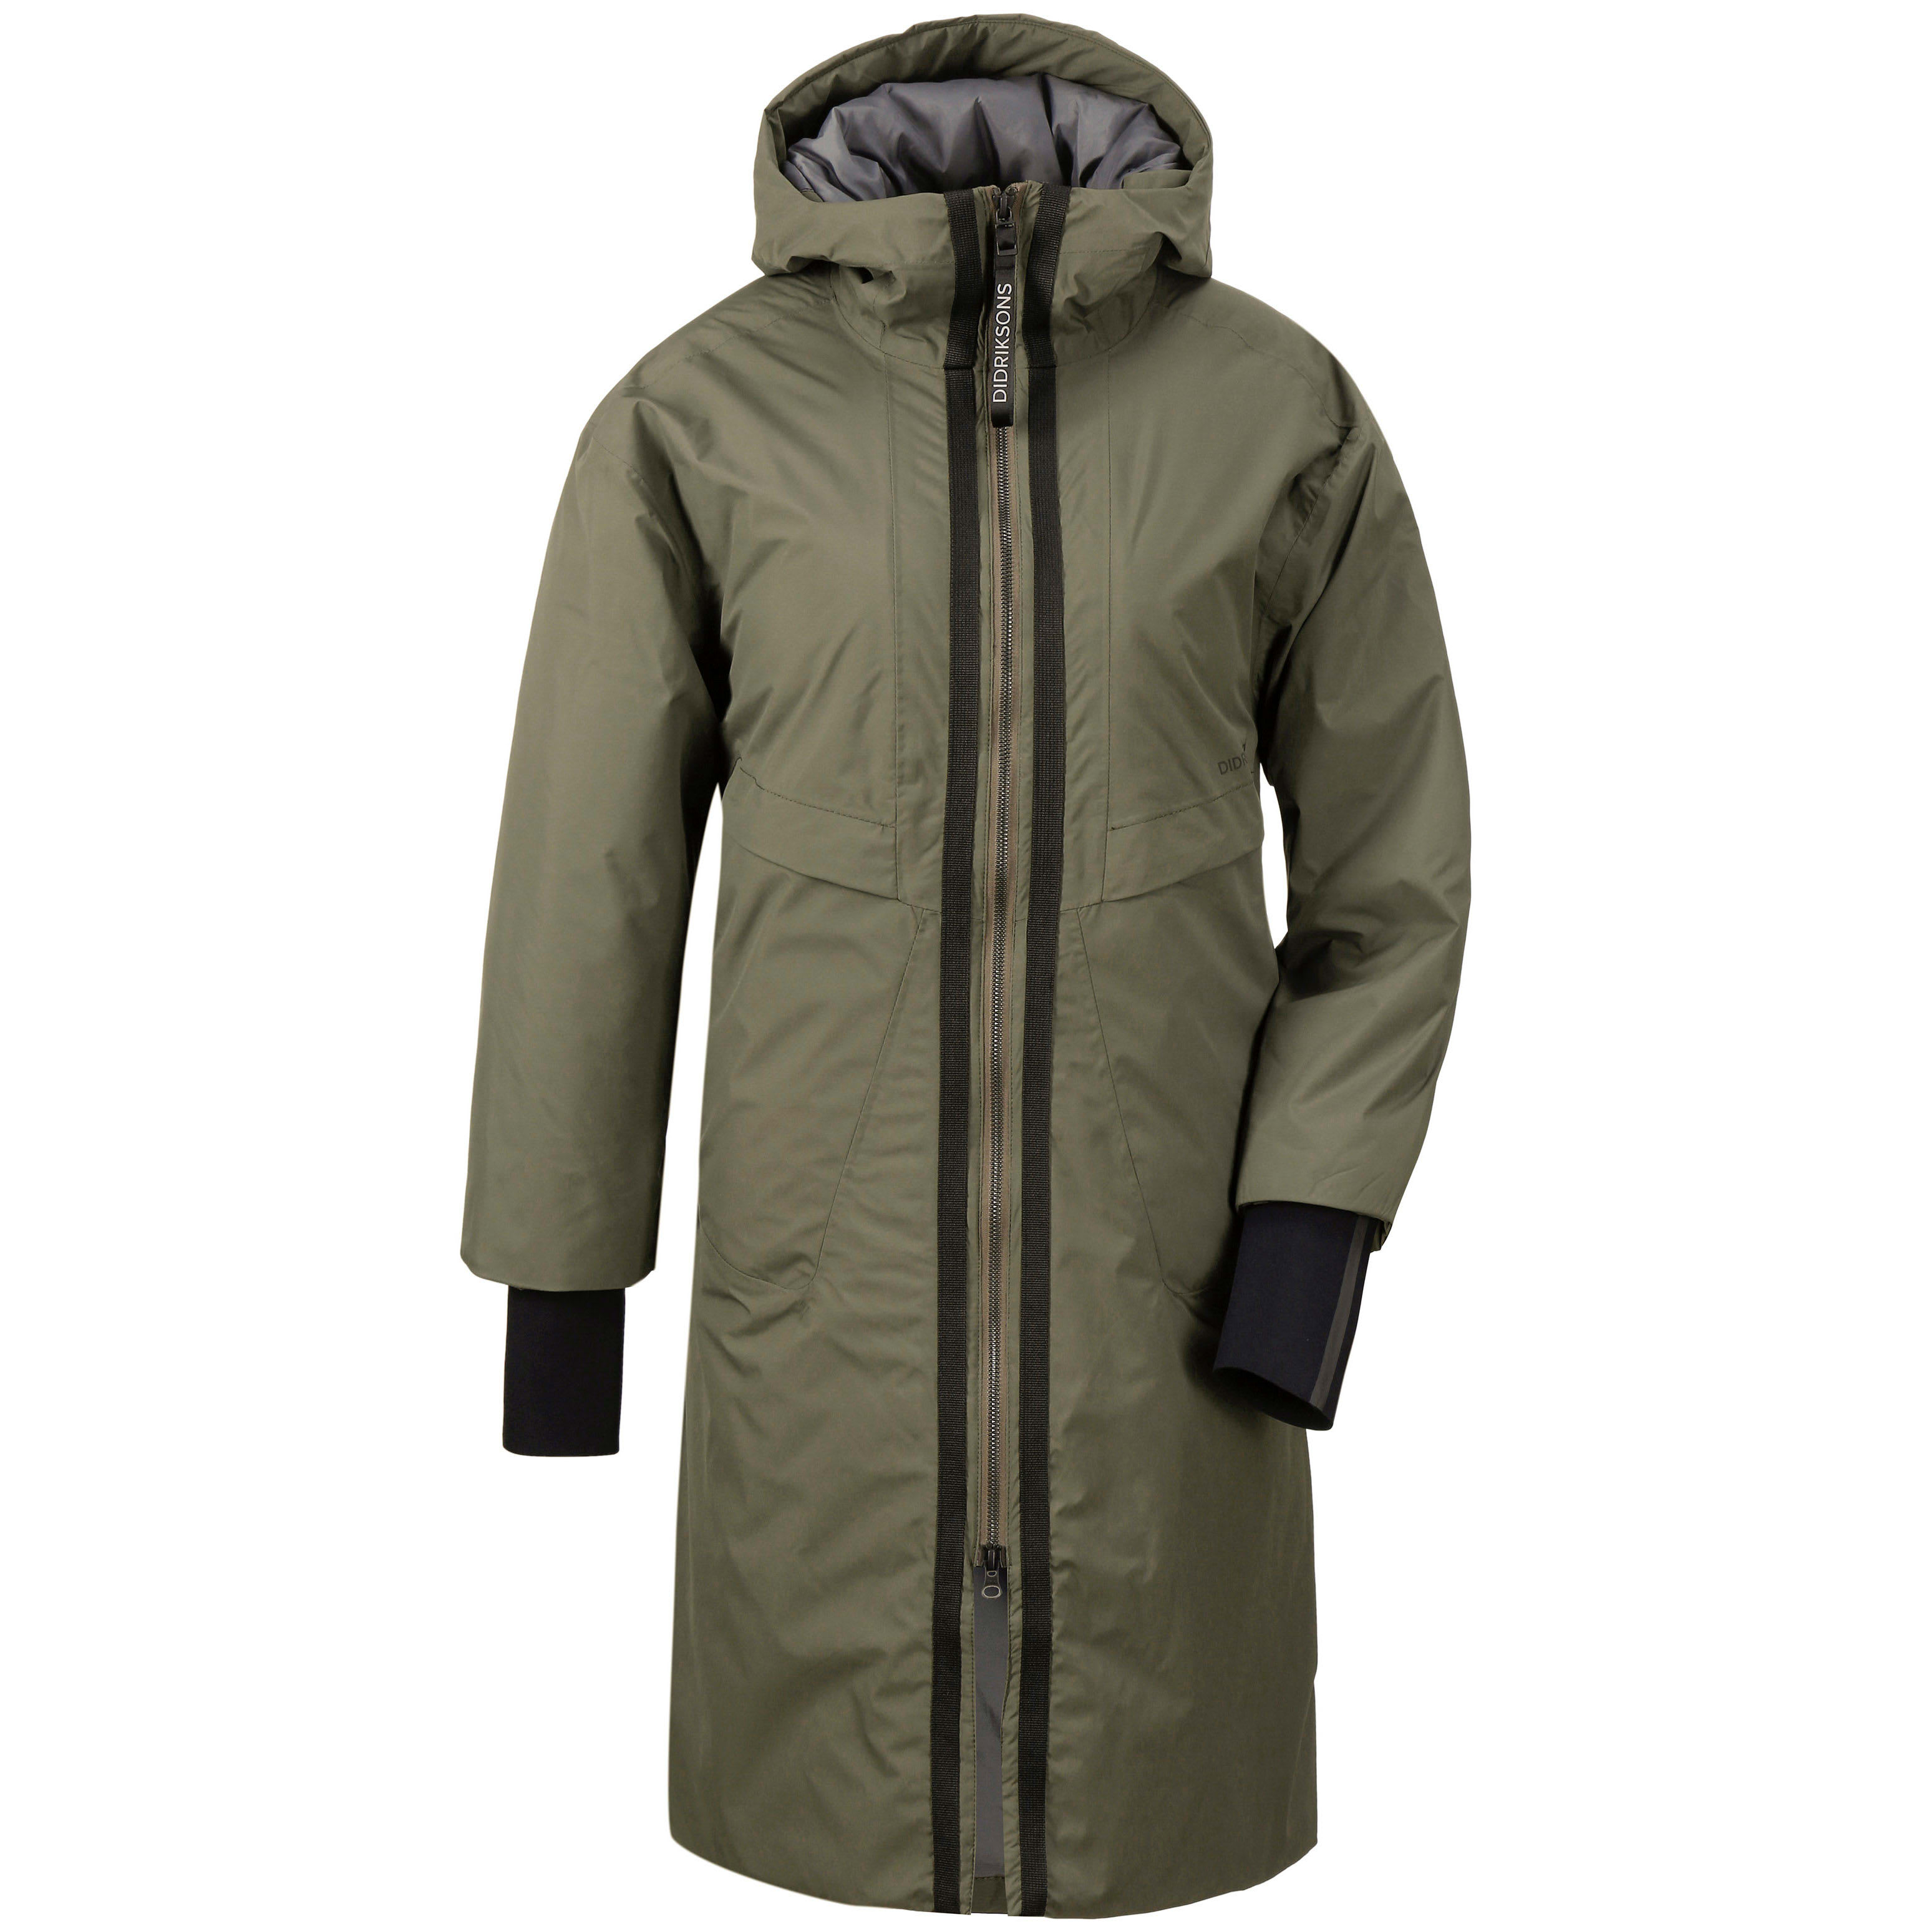 Buy Didriksons Aino Women's Parka 2-2020 from Outnorth